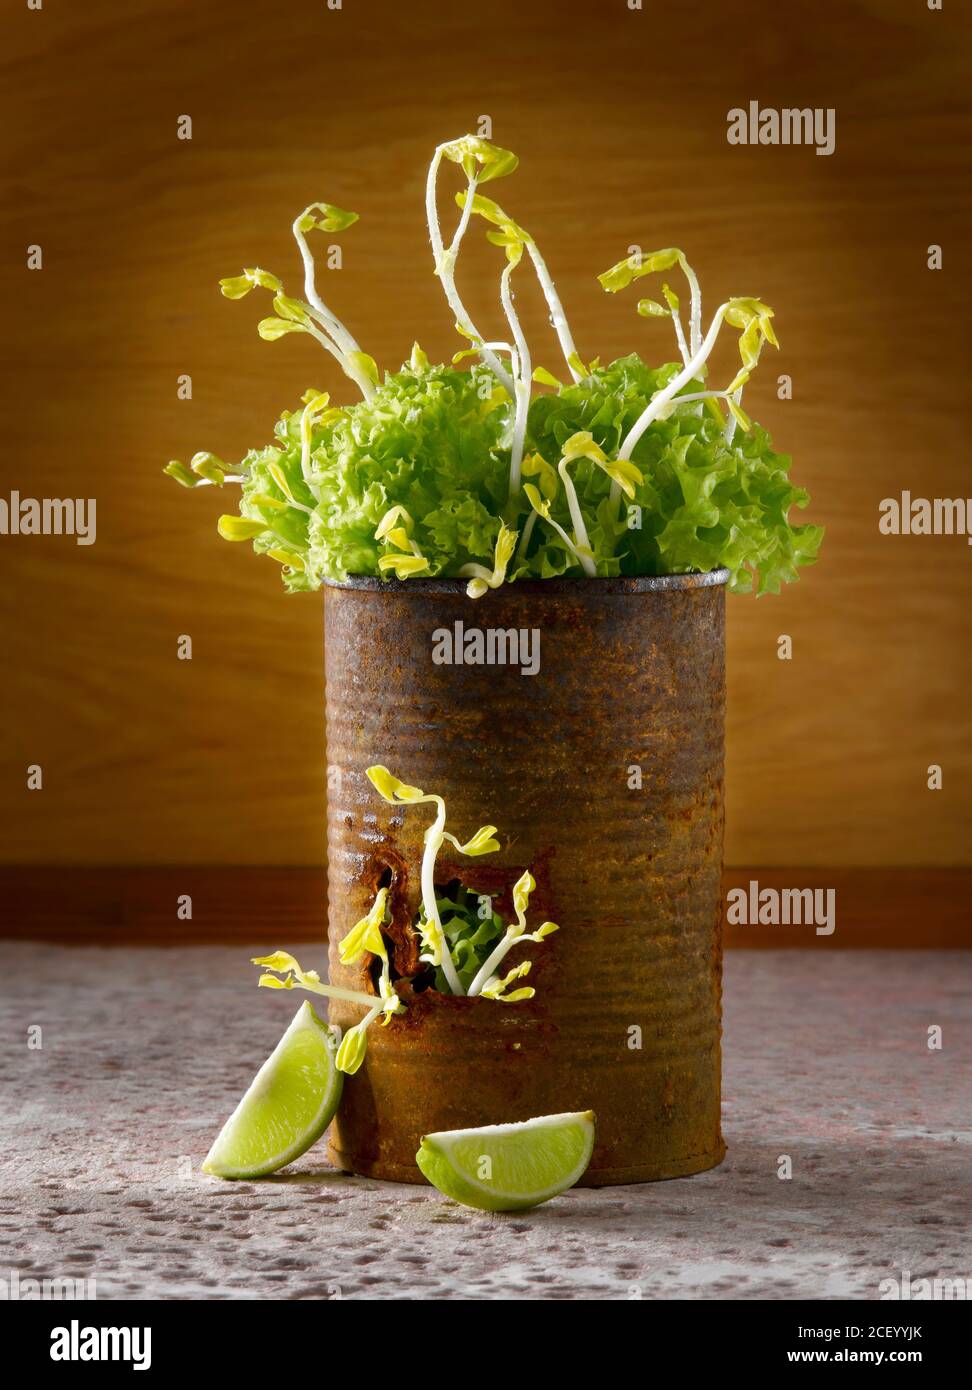 Jar with green sprouts Stock Photo